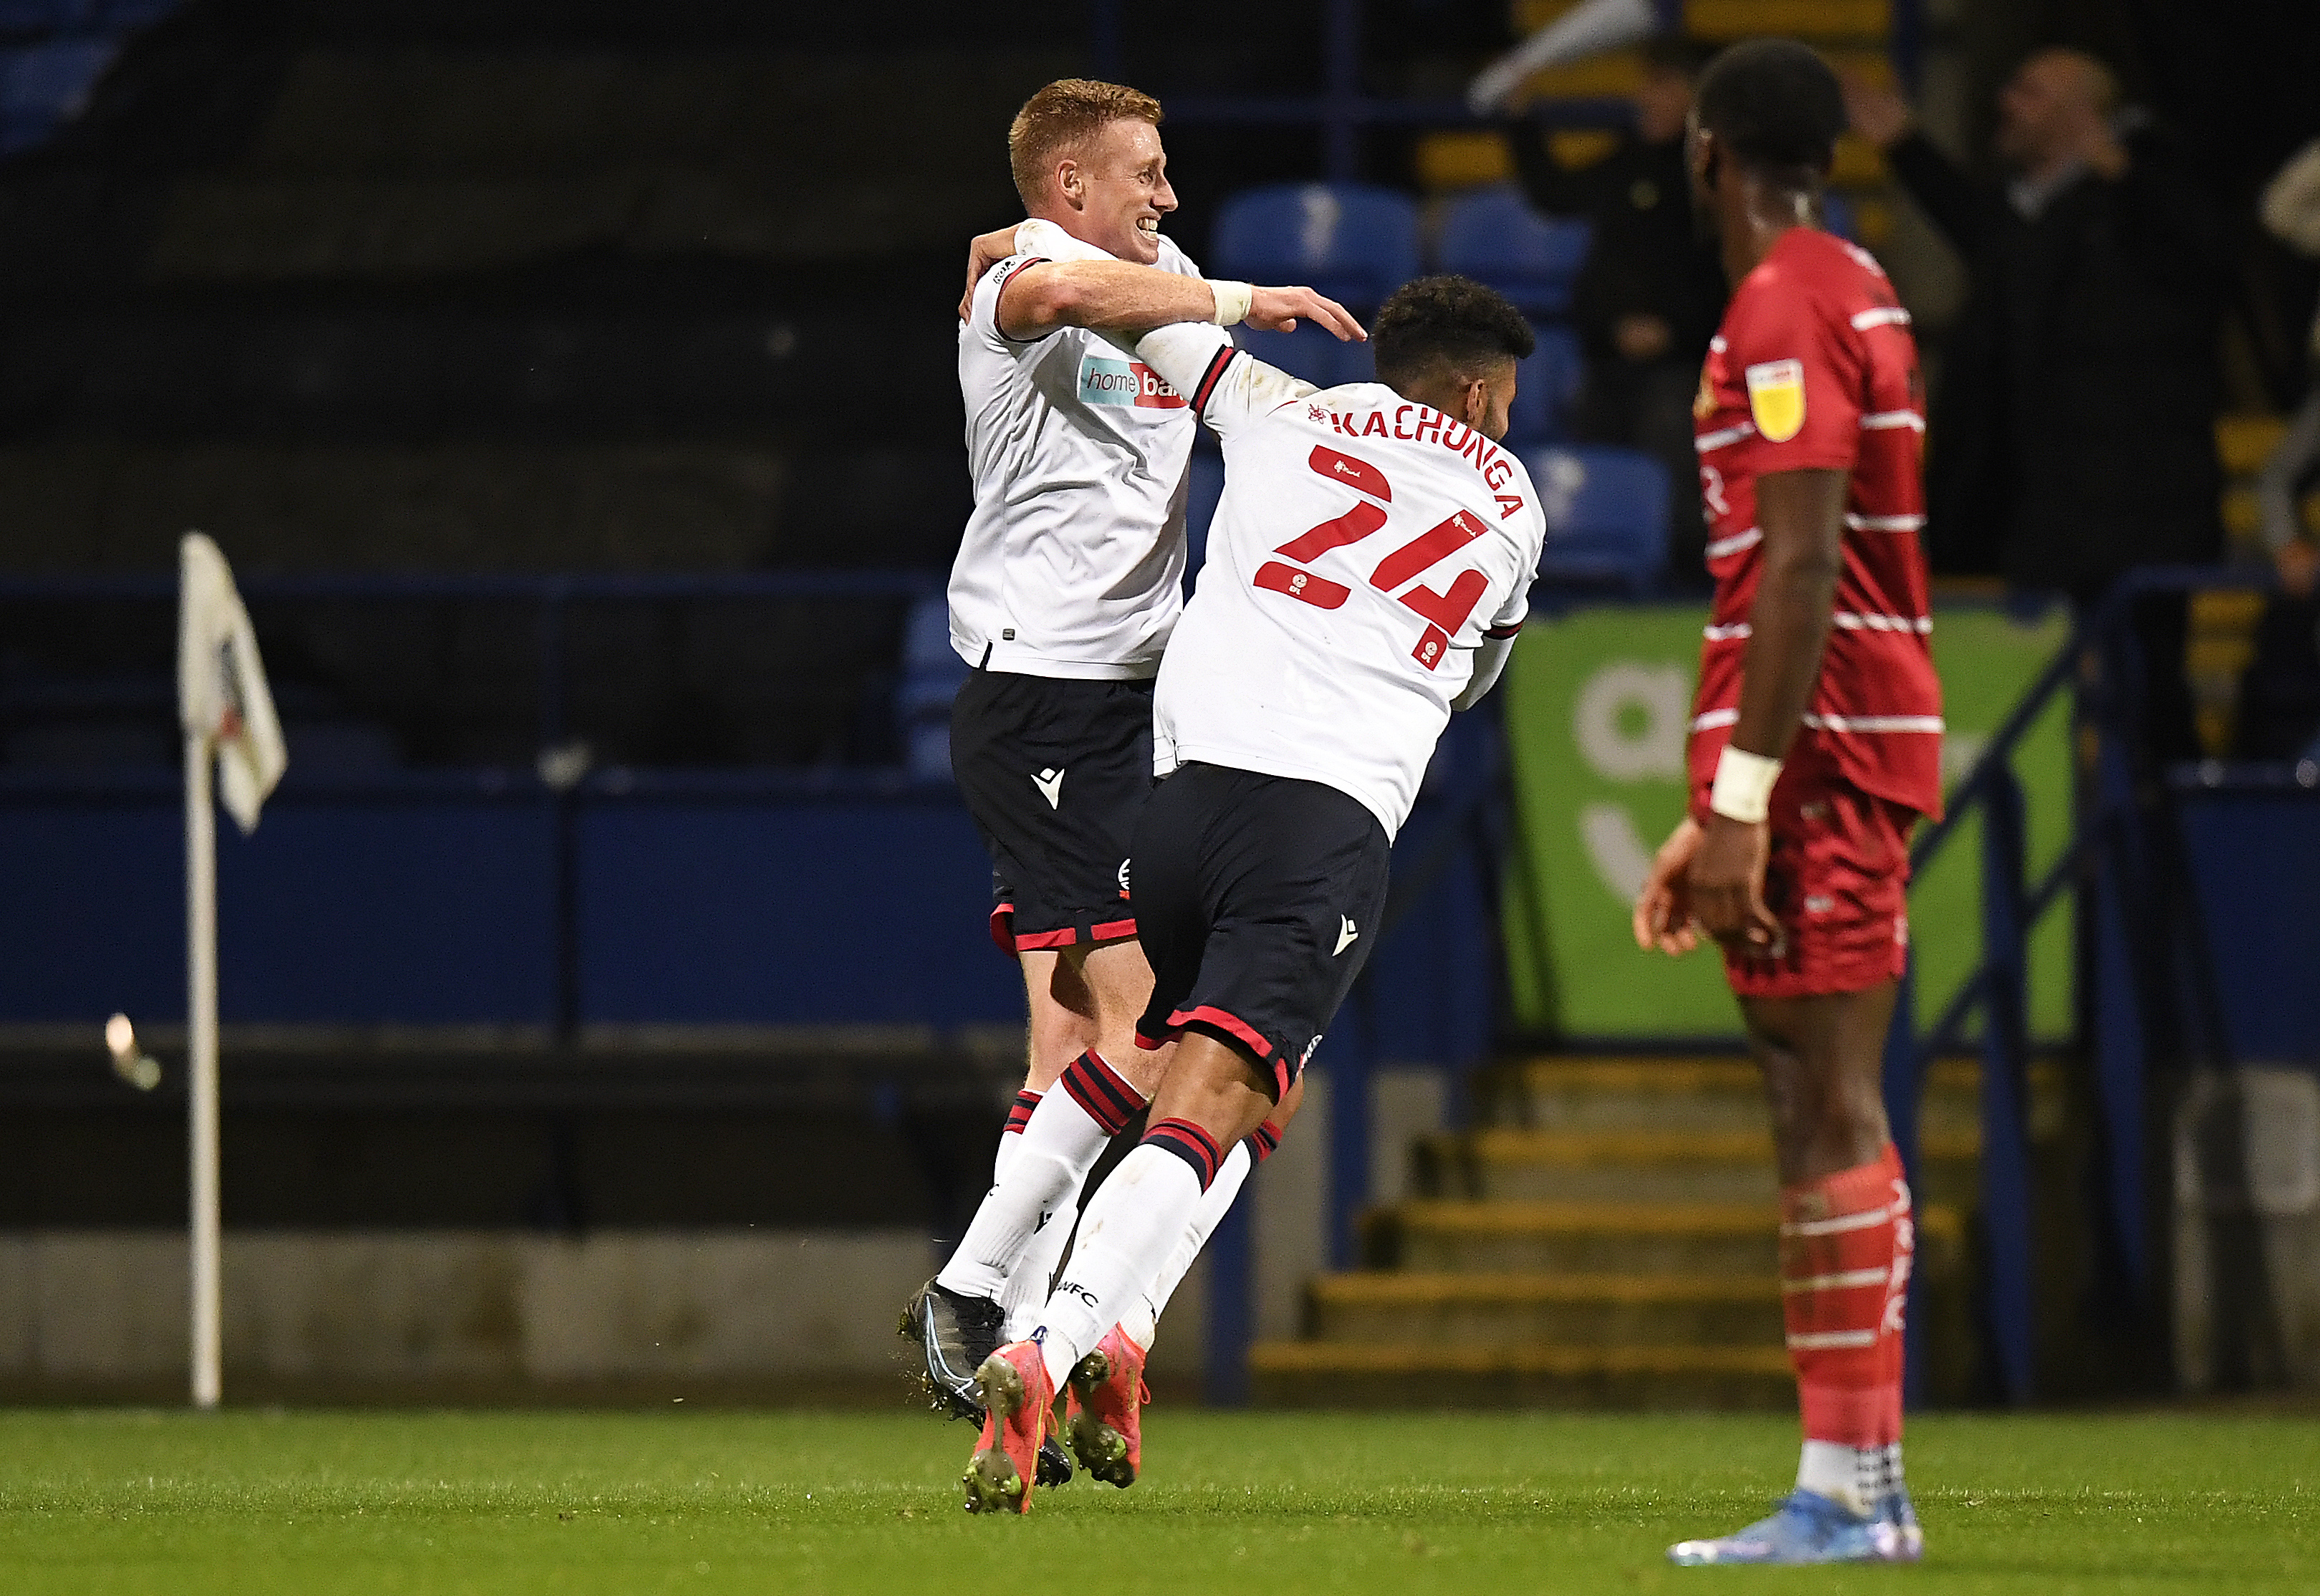 Bolton Wanderers v Doncaster Rovers - Sky Bet League One